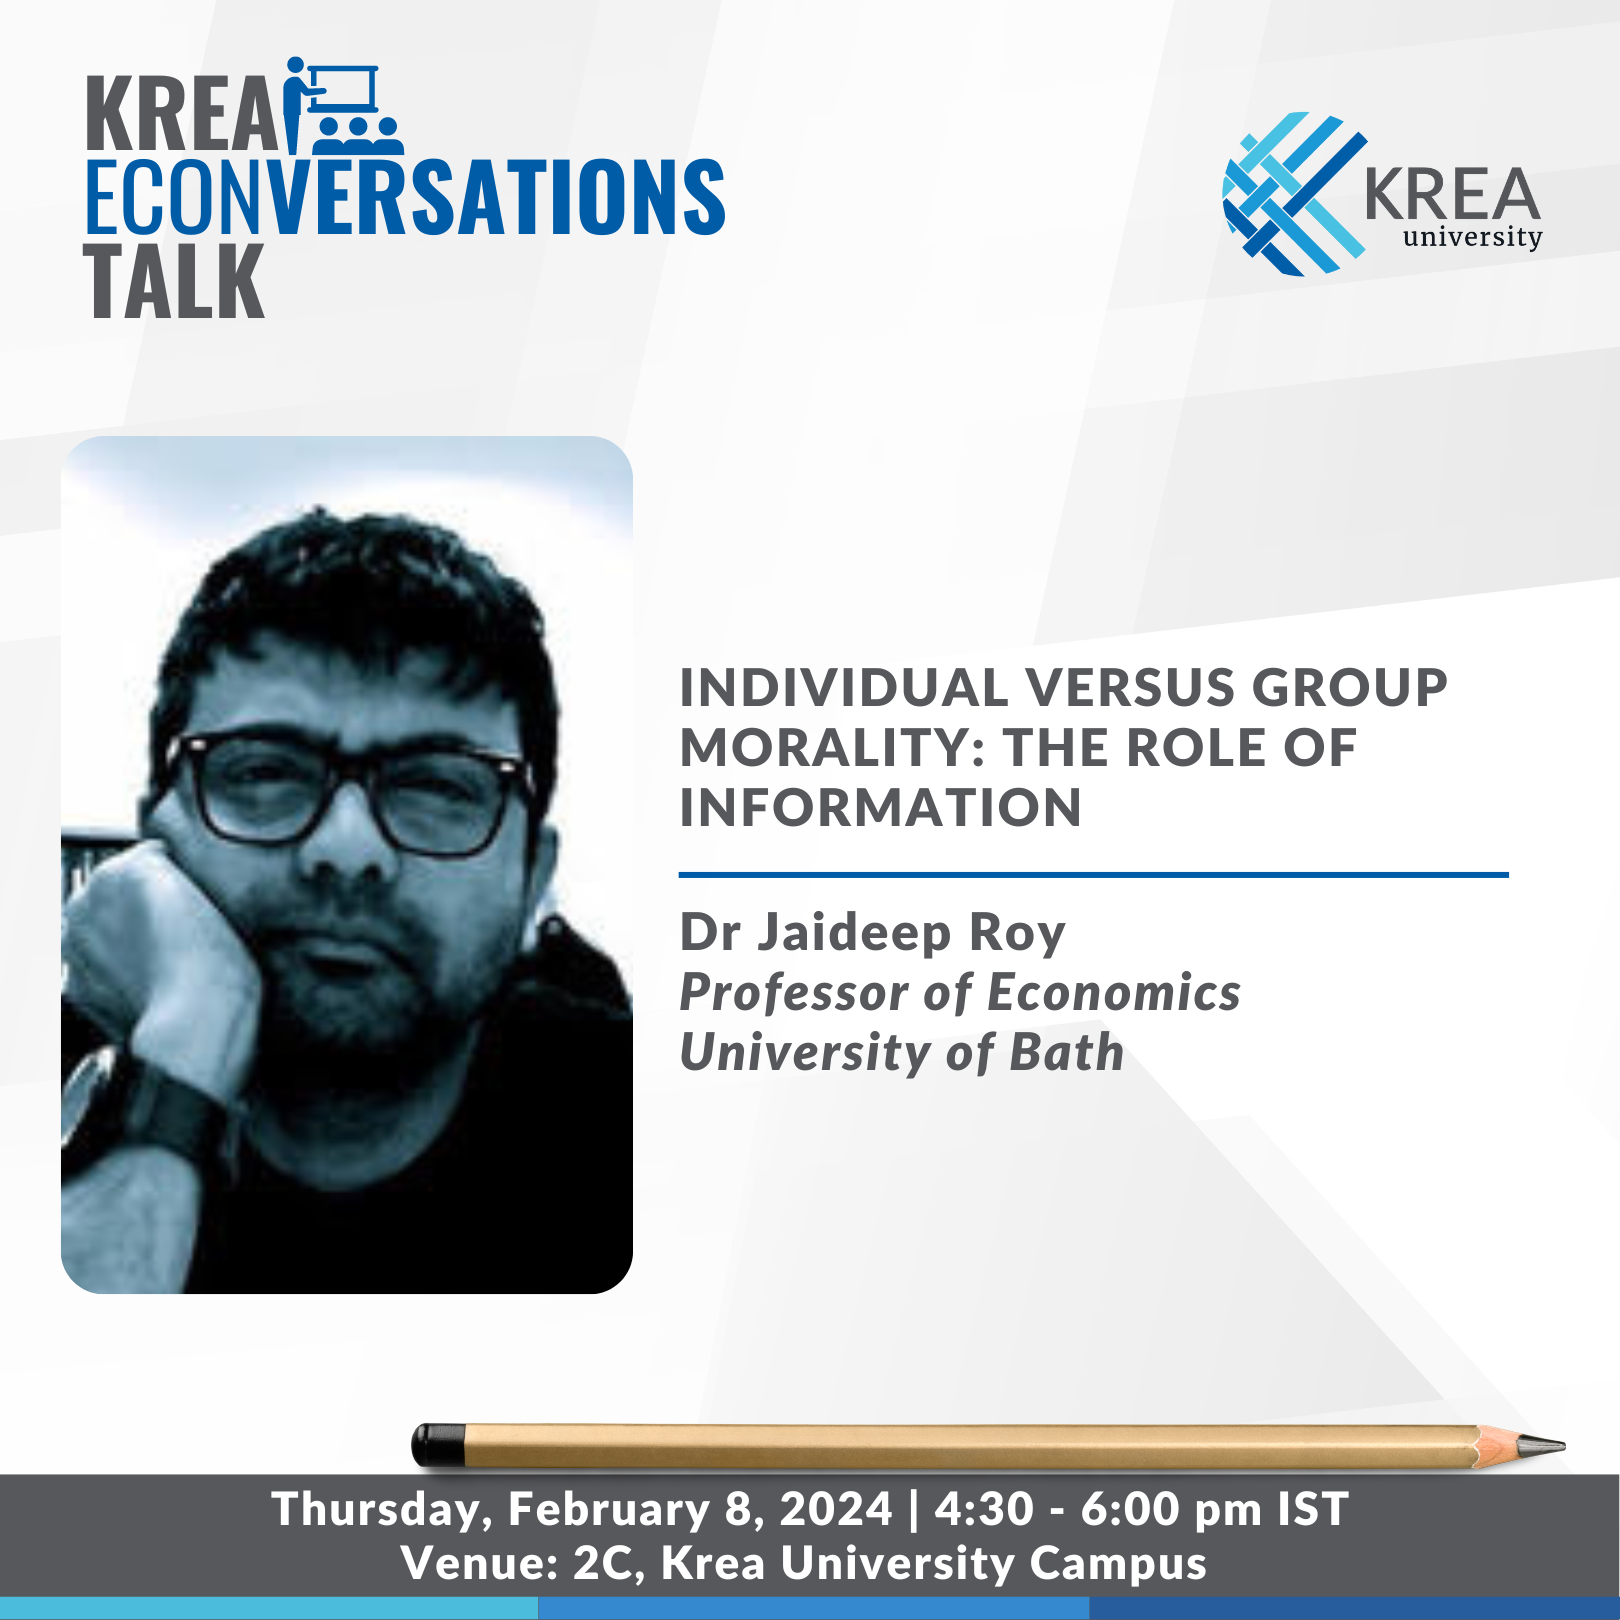 A Talk on Individual versus Group Morality: the Role of Information by Dr Jaideep Roy